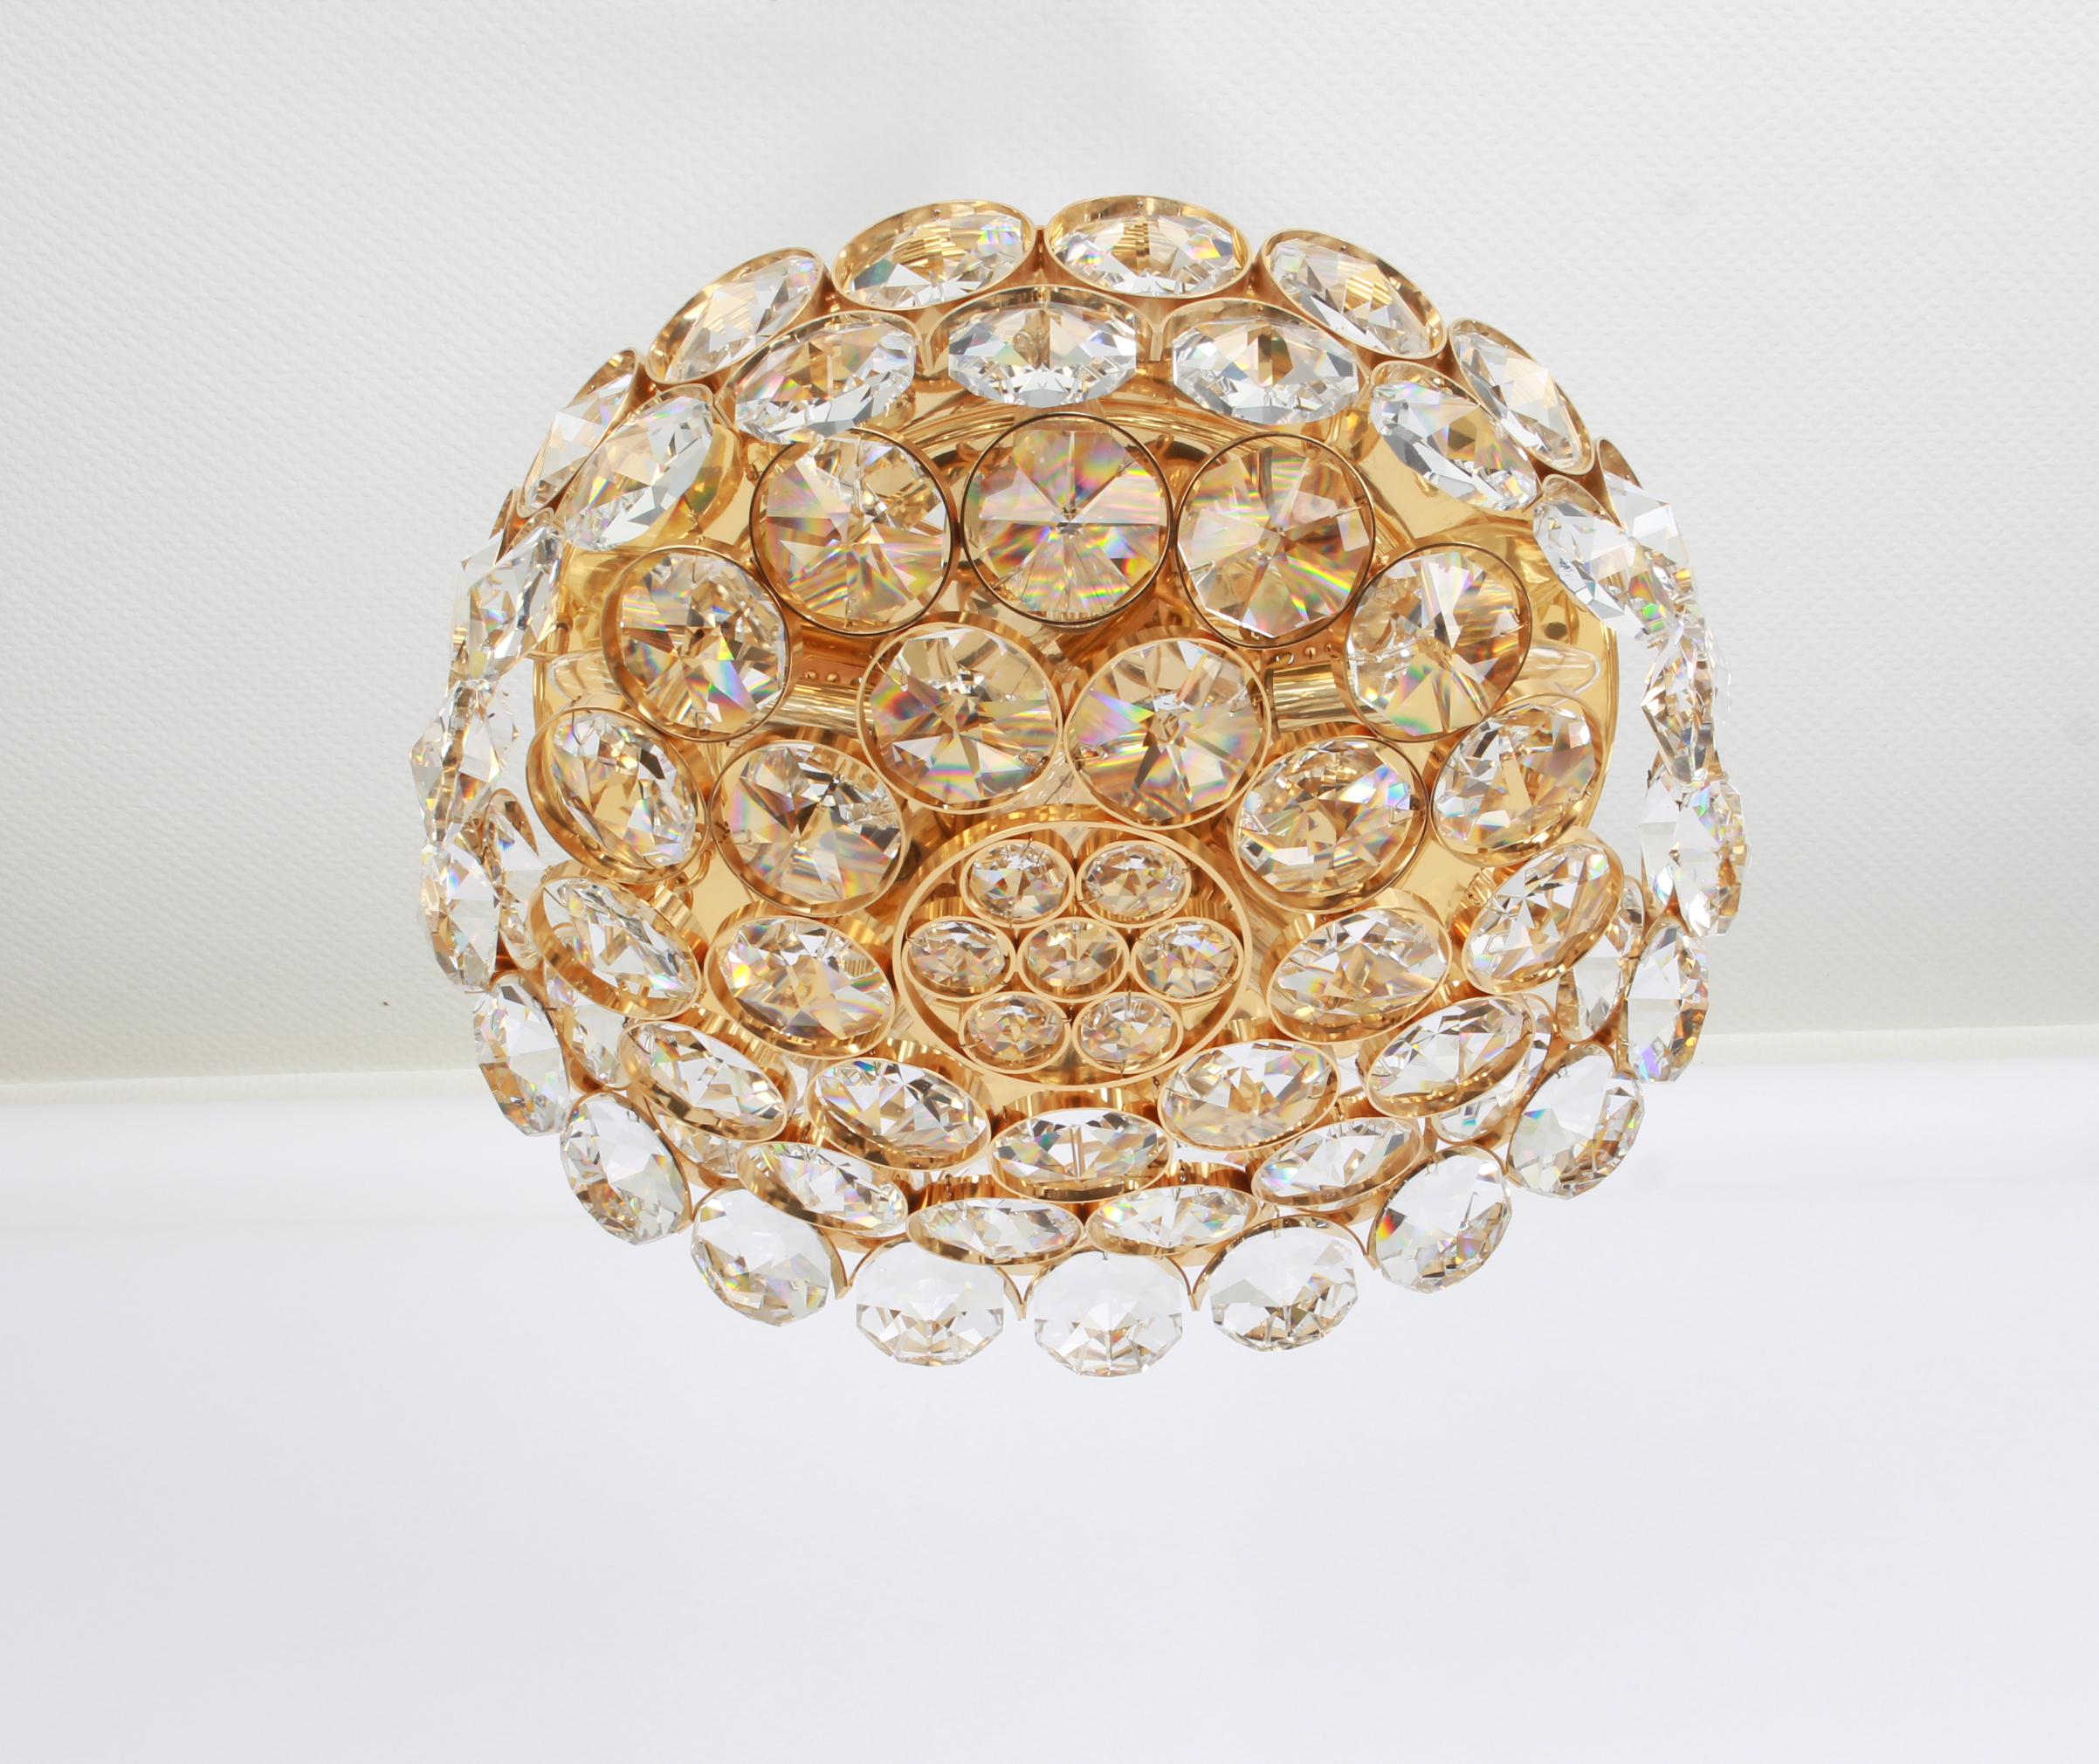 A wonderful and high quality gilded chandelier/Flush mount light fixture by Palwa (Palme & Walter), Germany, 1970s

It is made of a 24-carat gold-plated brass frame decorated with hundreds of cut crystal glass. The bottom is made of a round cut